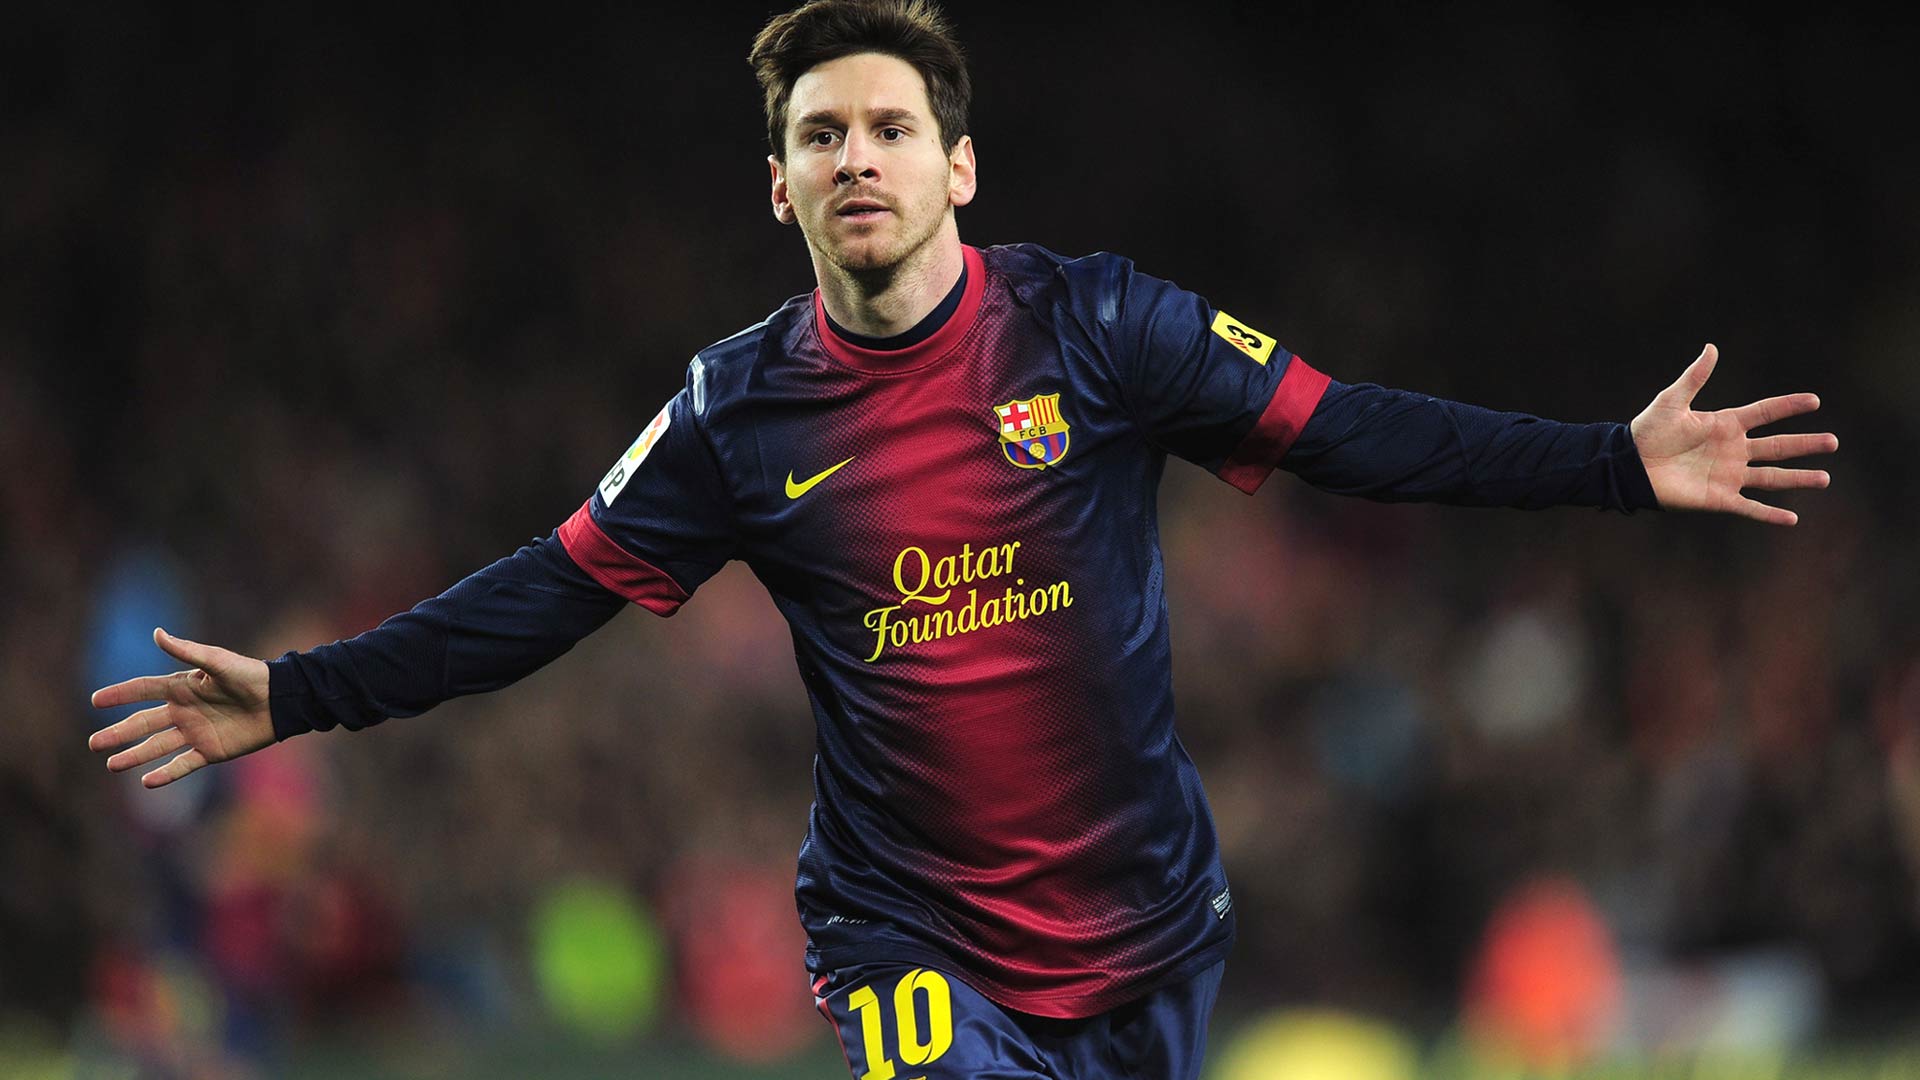 Lionel Messi Wallpapers